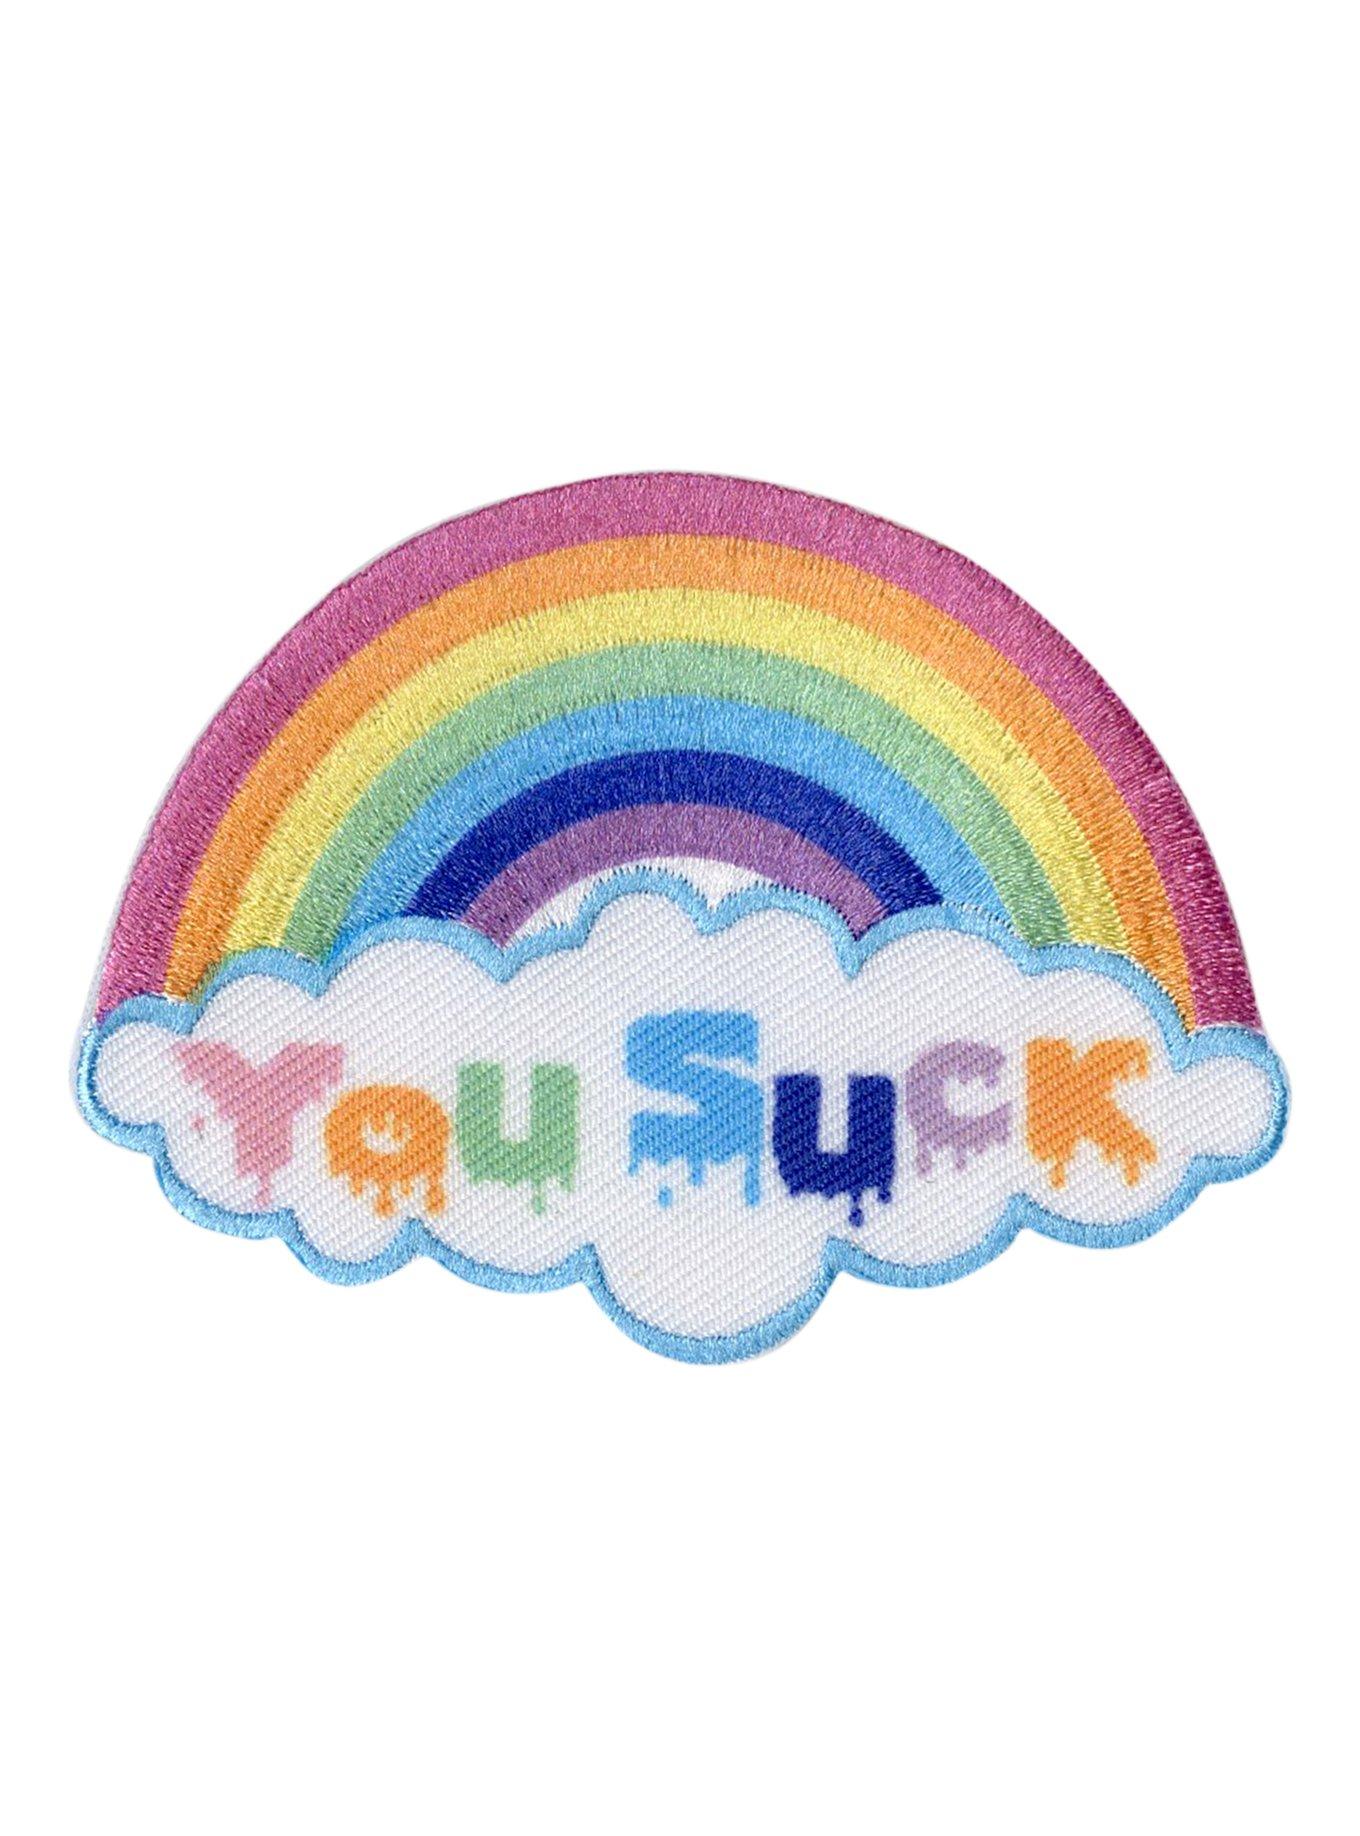 You Suck Rainbow Iron-On Patch, , hi-res